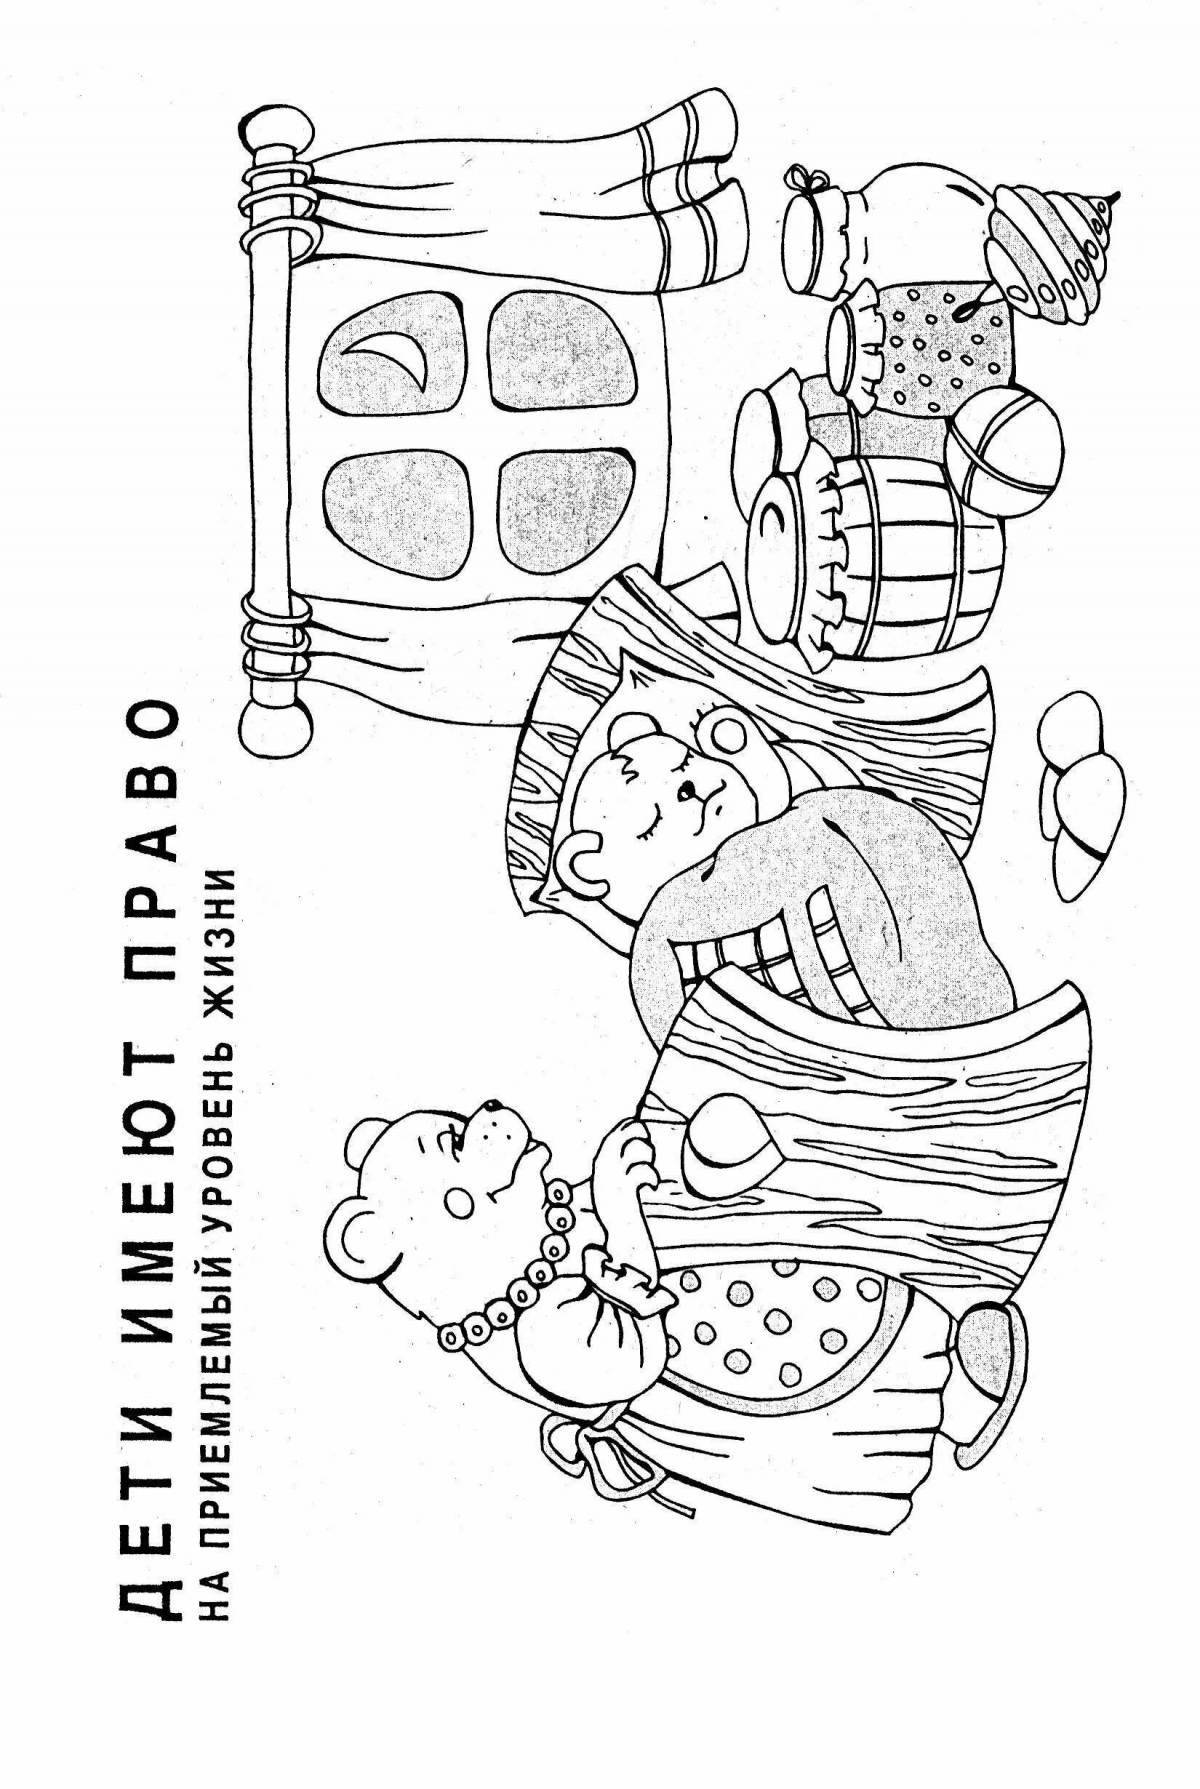 Playful child rights coloring page